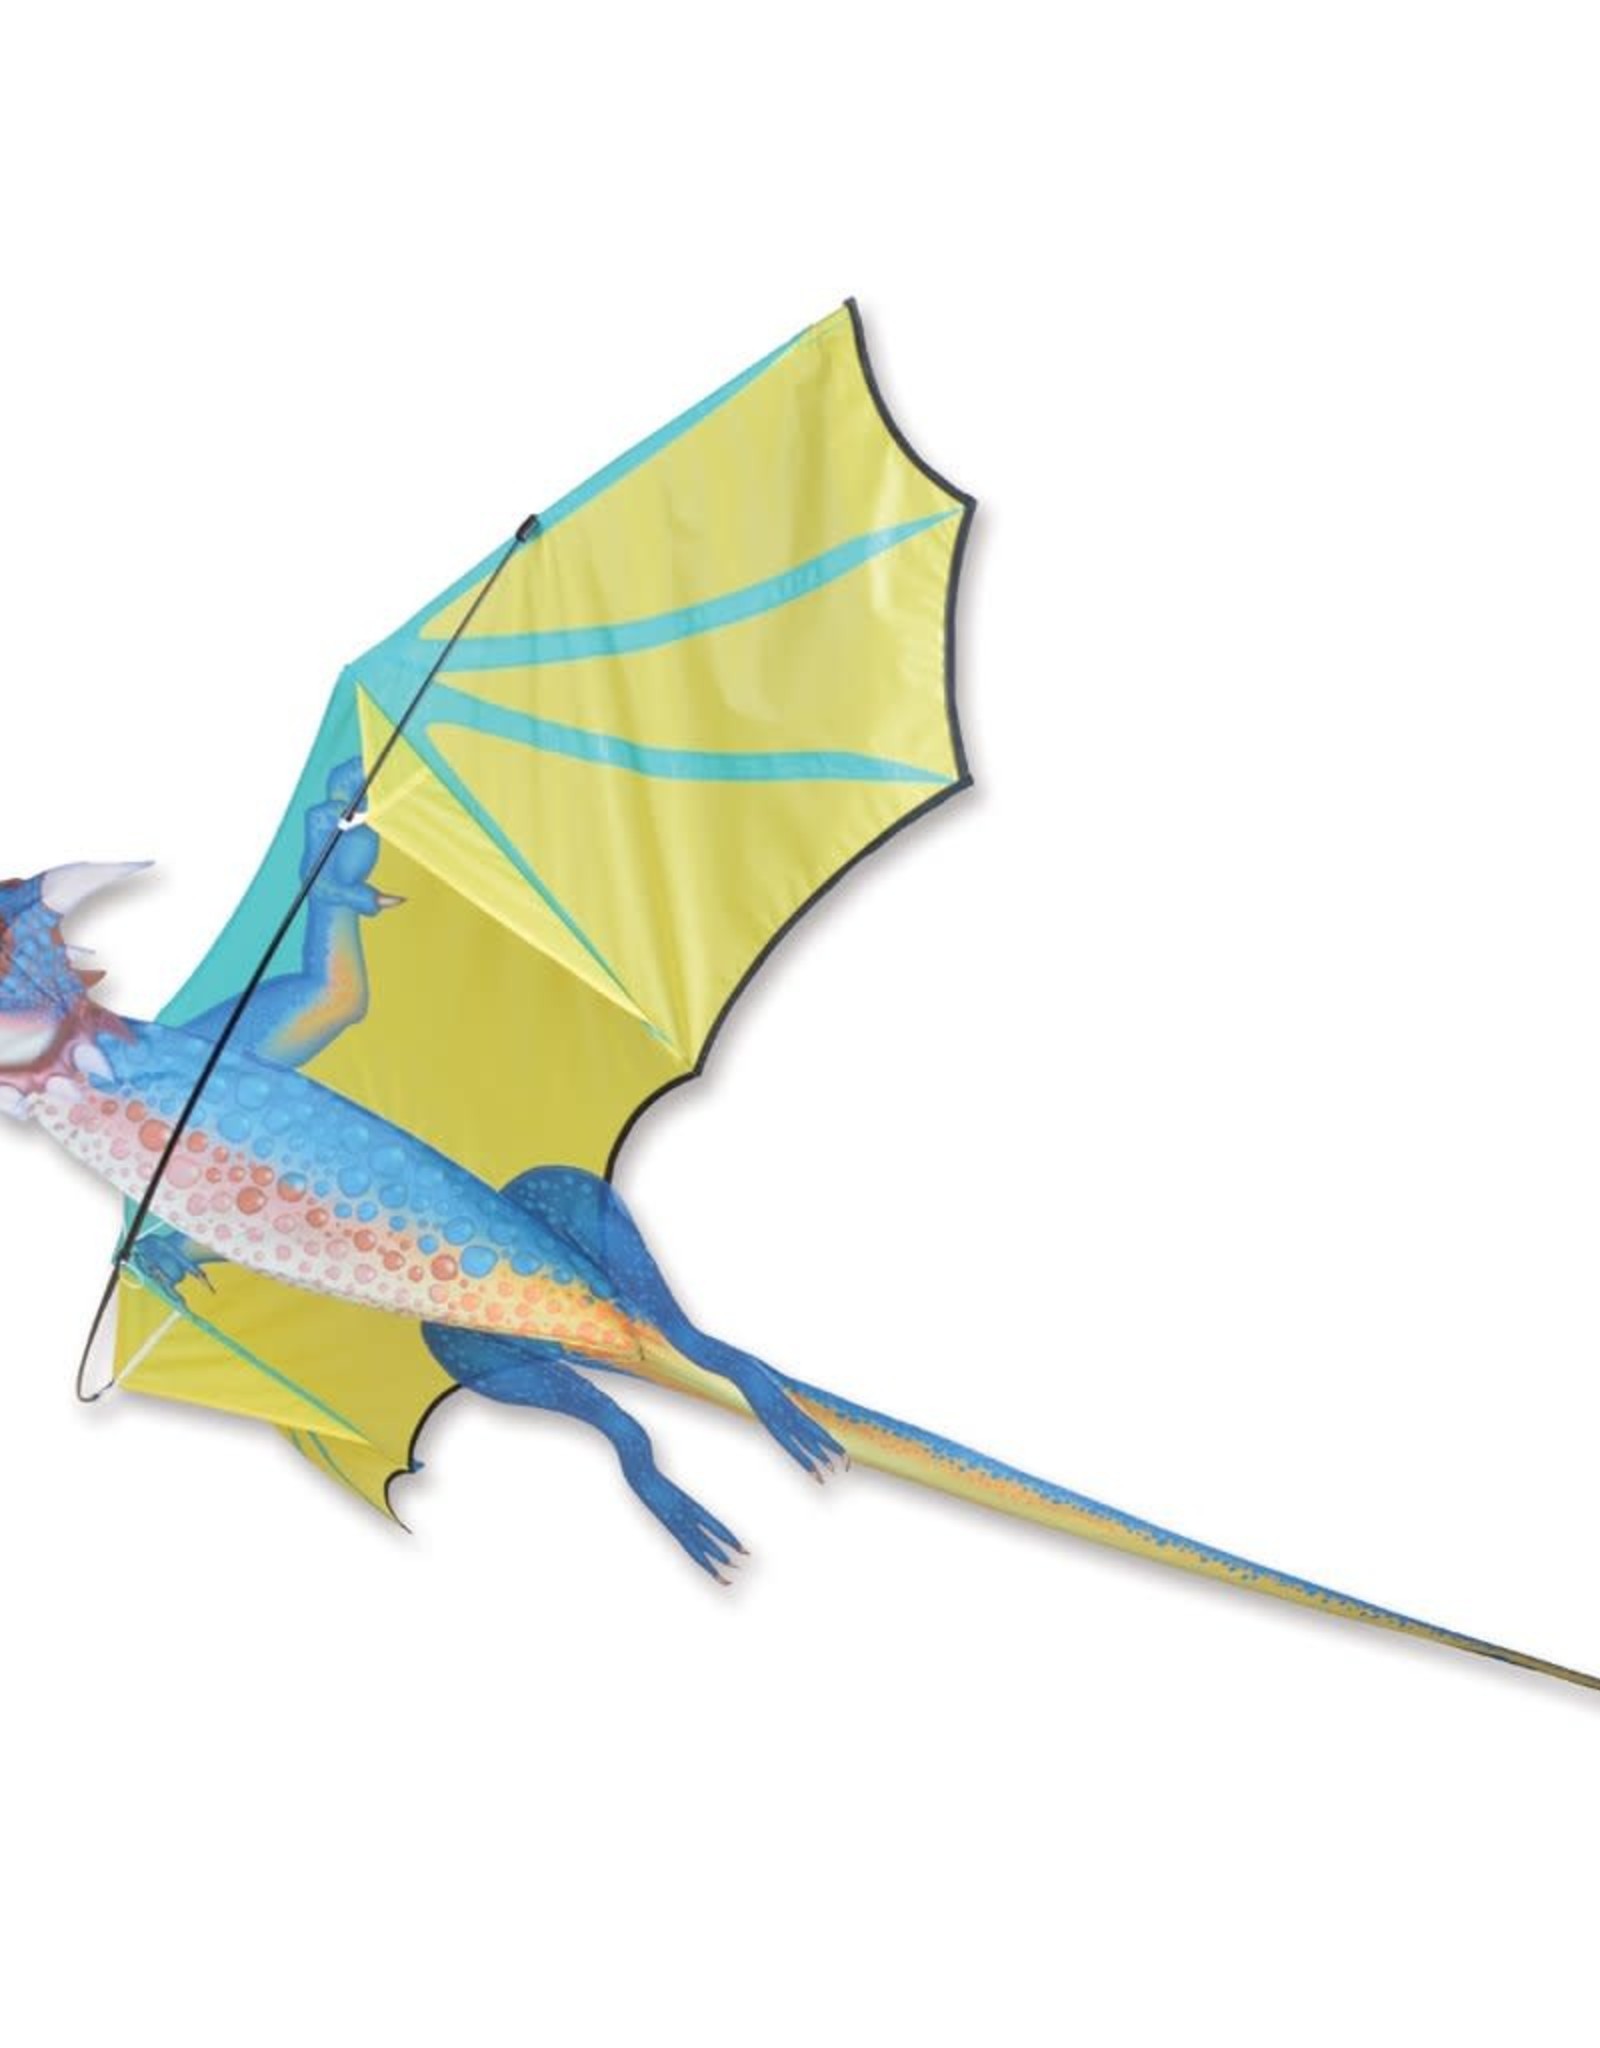 Premier Kites 3D DRAGON - Stormcloud Kite *Not available for shipping. Pick up only.